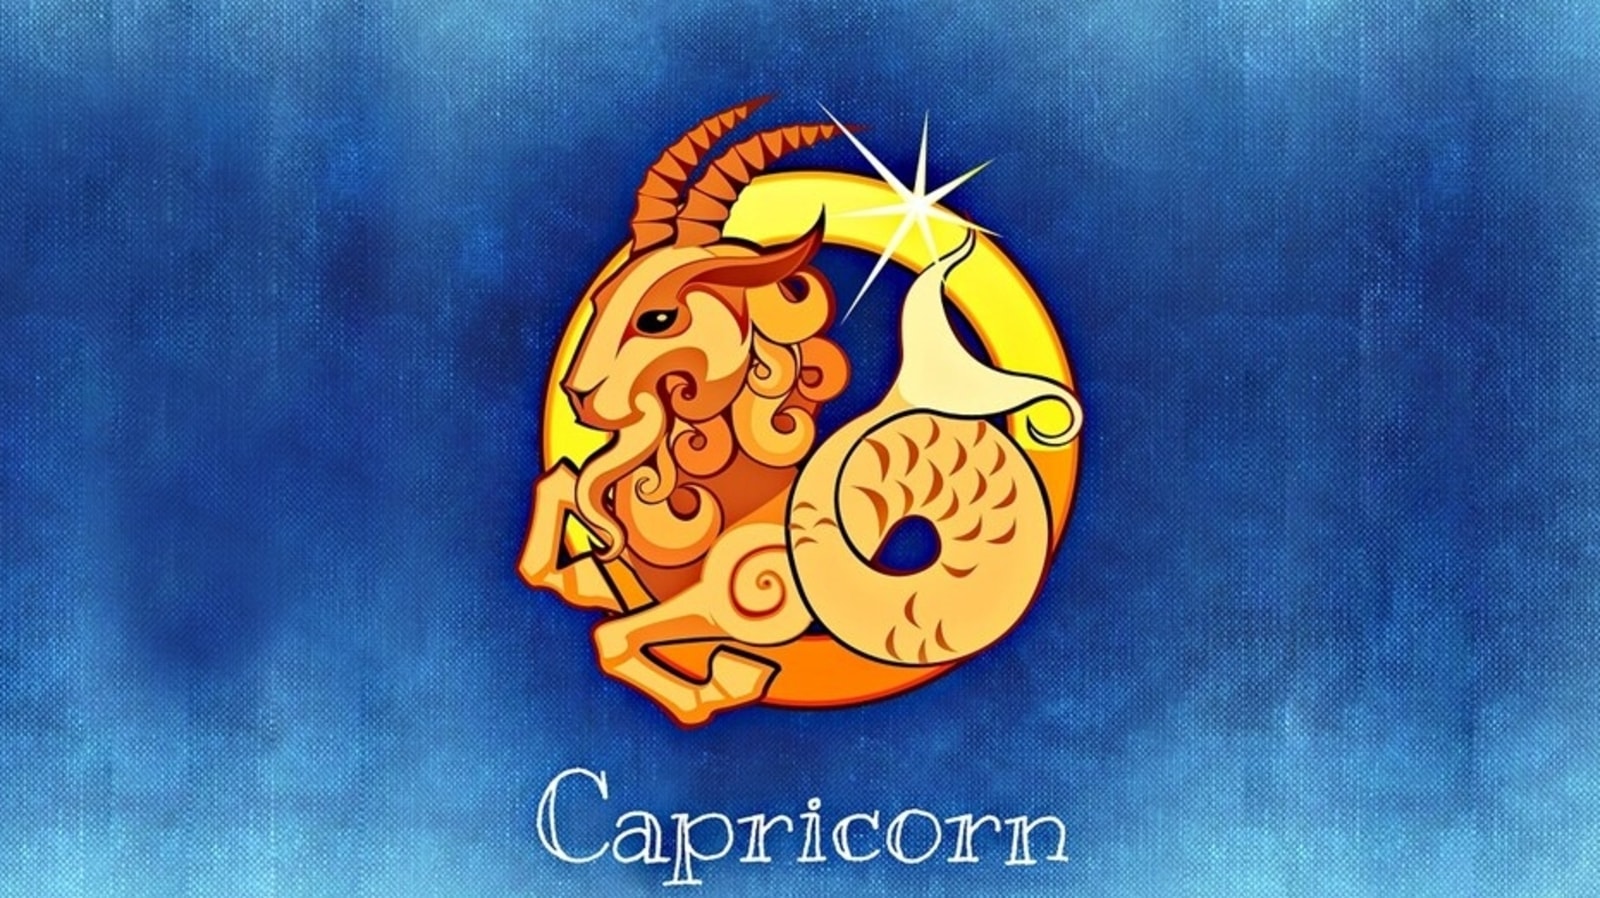 Capricorn Daily Horoscope Astrological Prediction for August 23